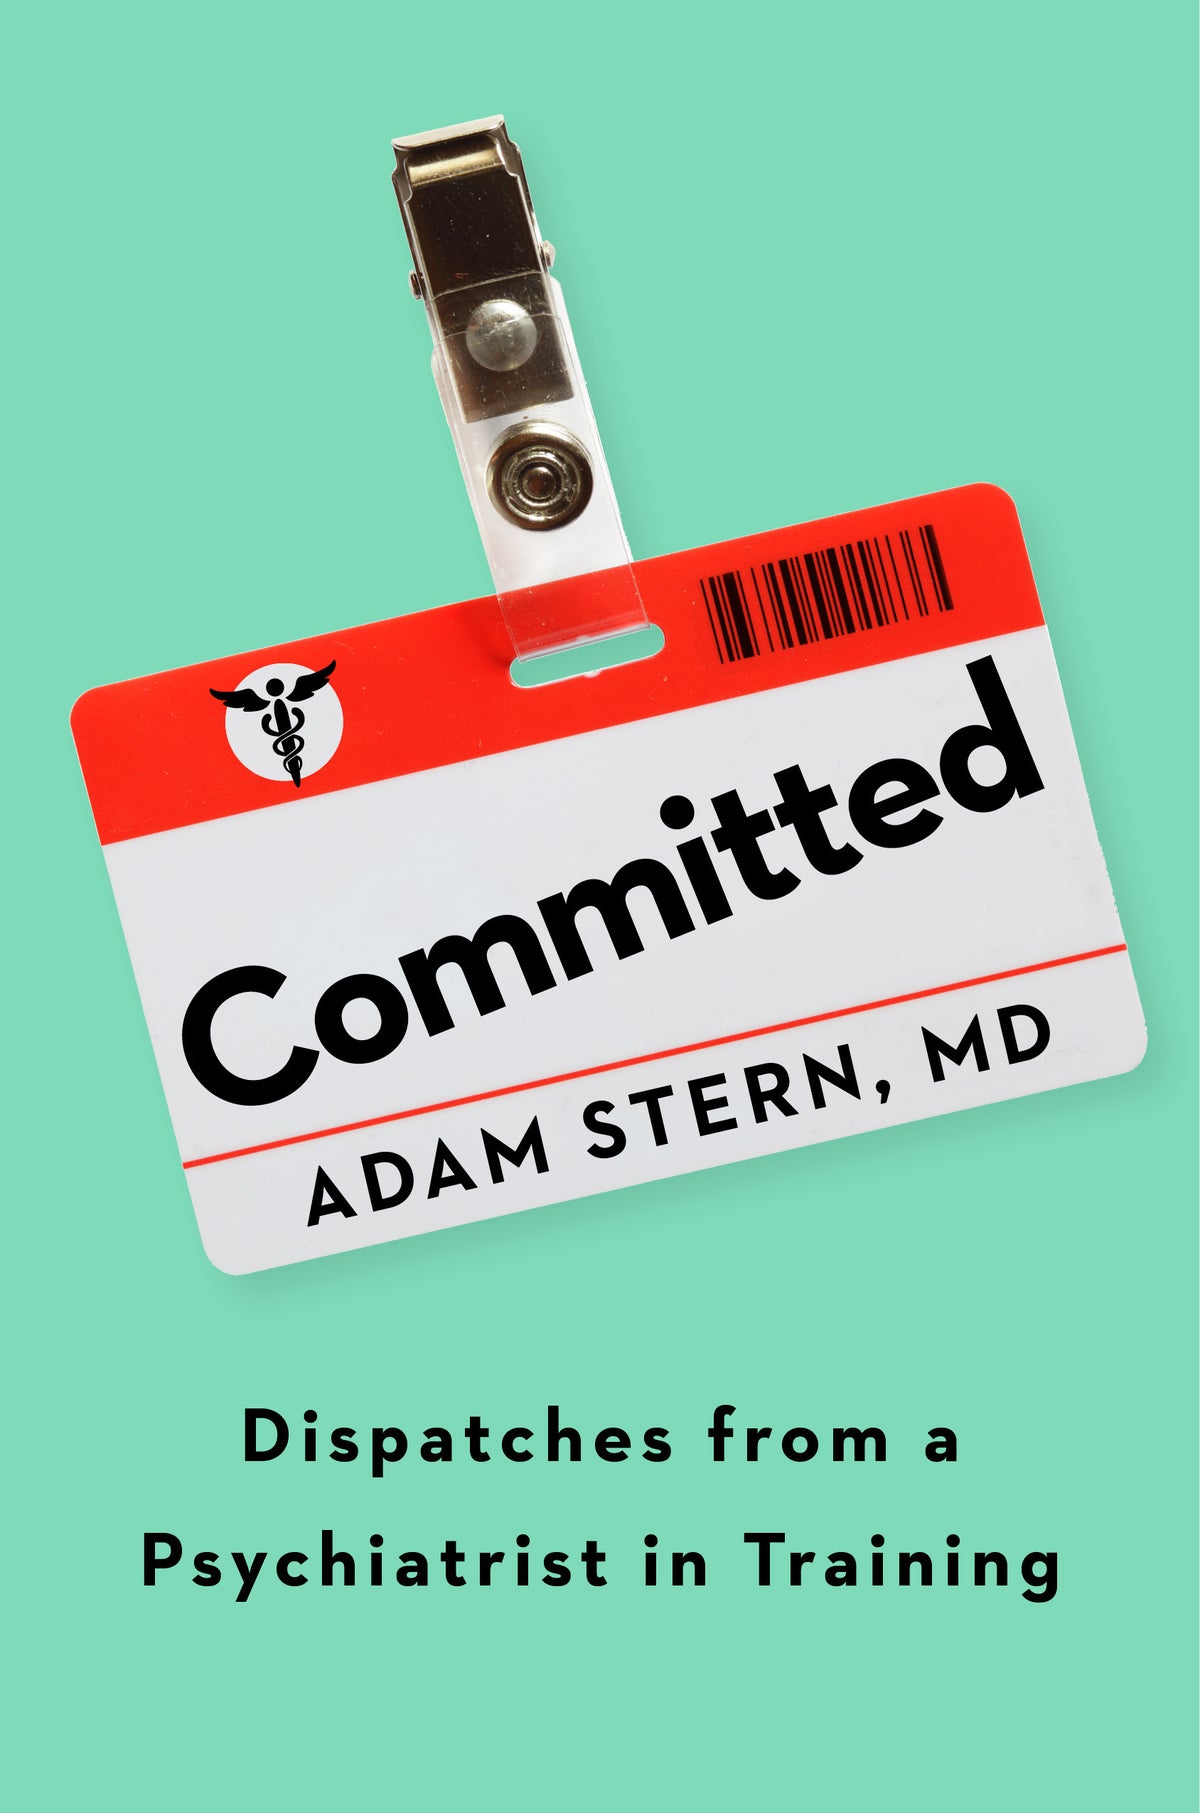 Committed: Dispatches From a Psychiatrist in Training;  Adam Stern